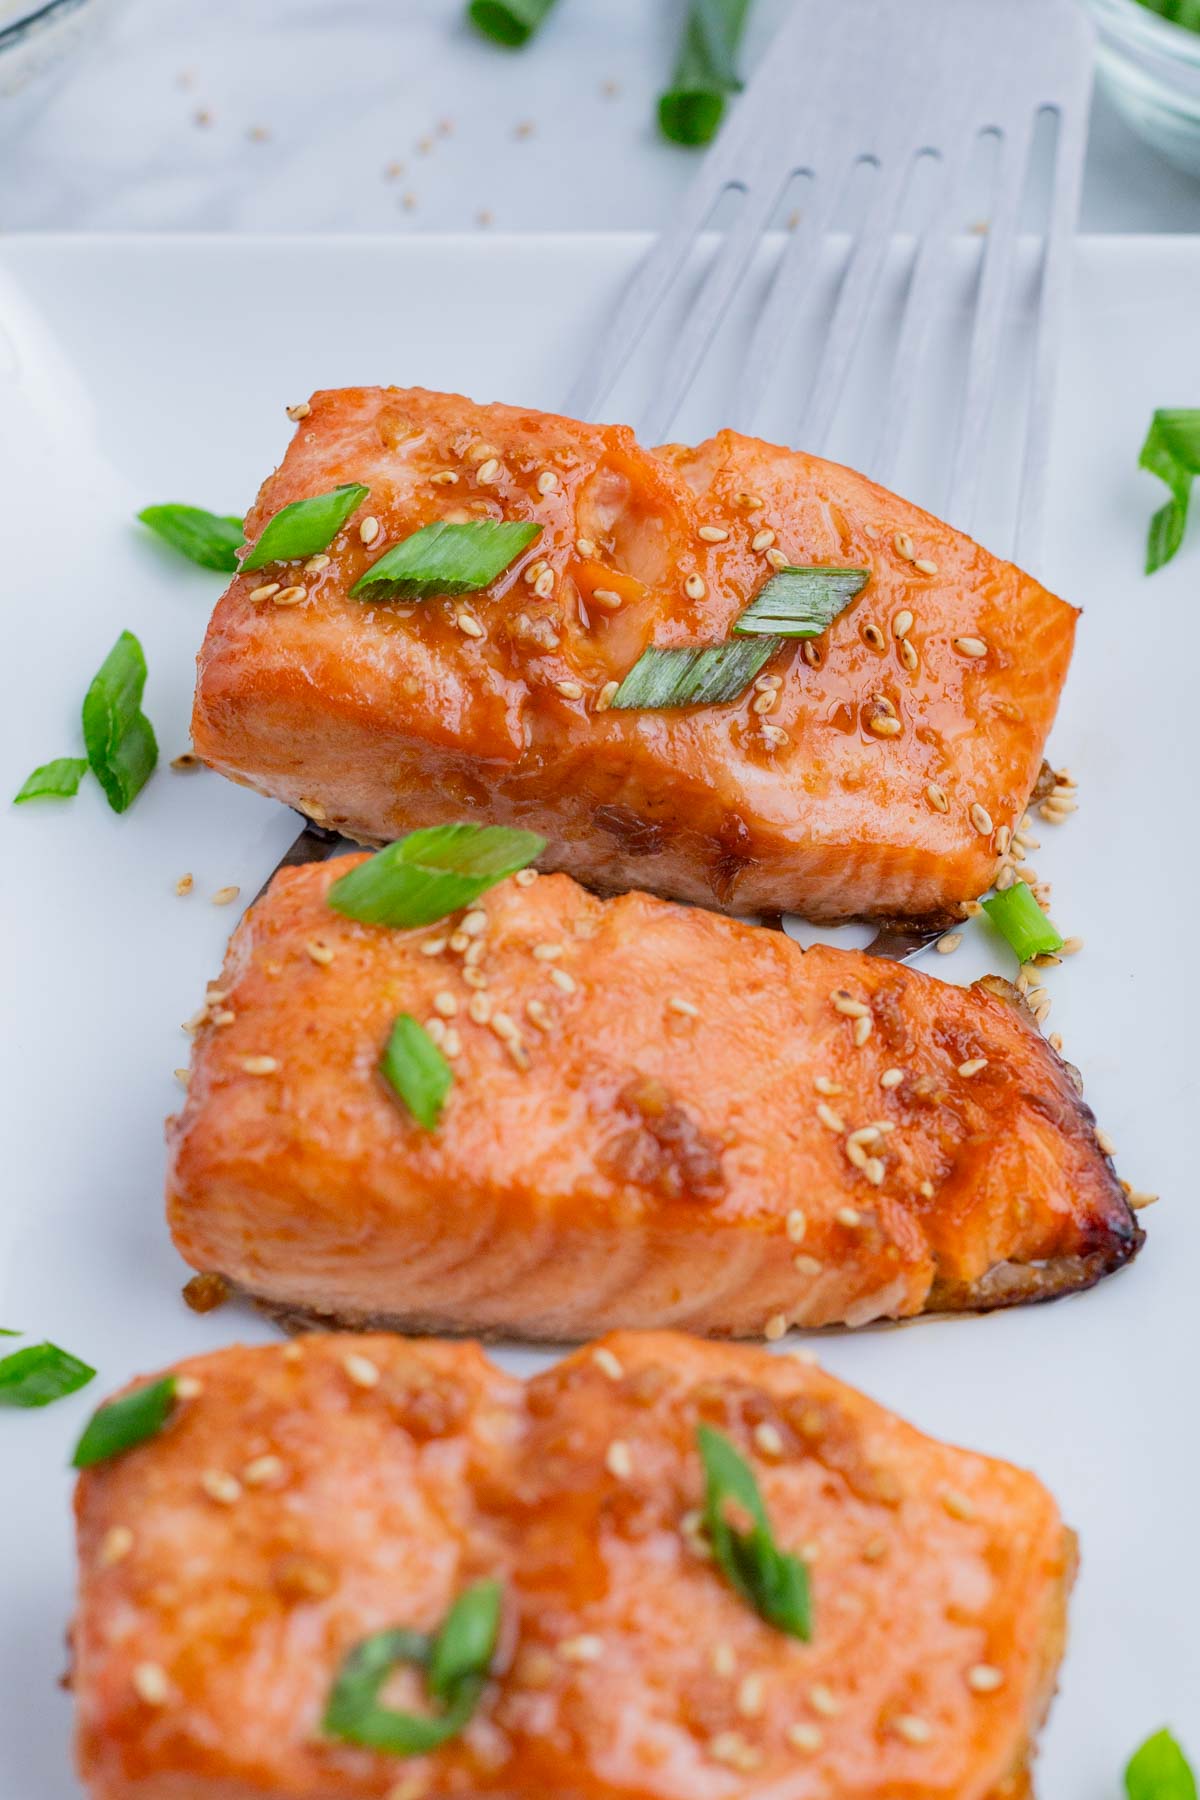 Salmon fillets are served on a long, white, rectangular serving platter.